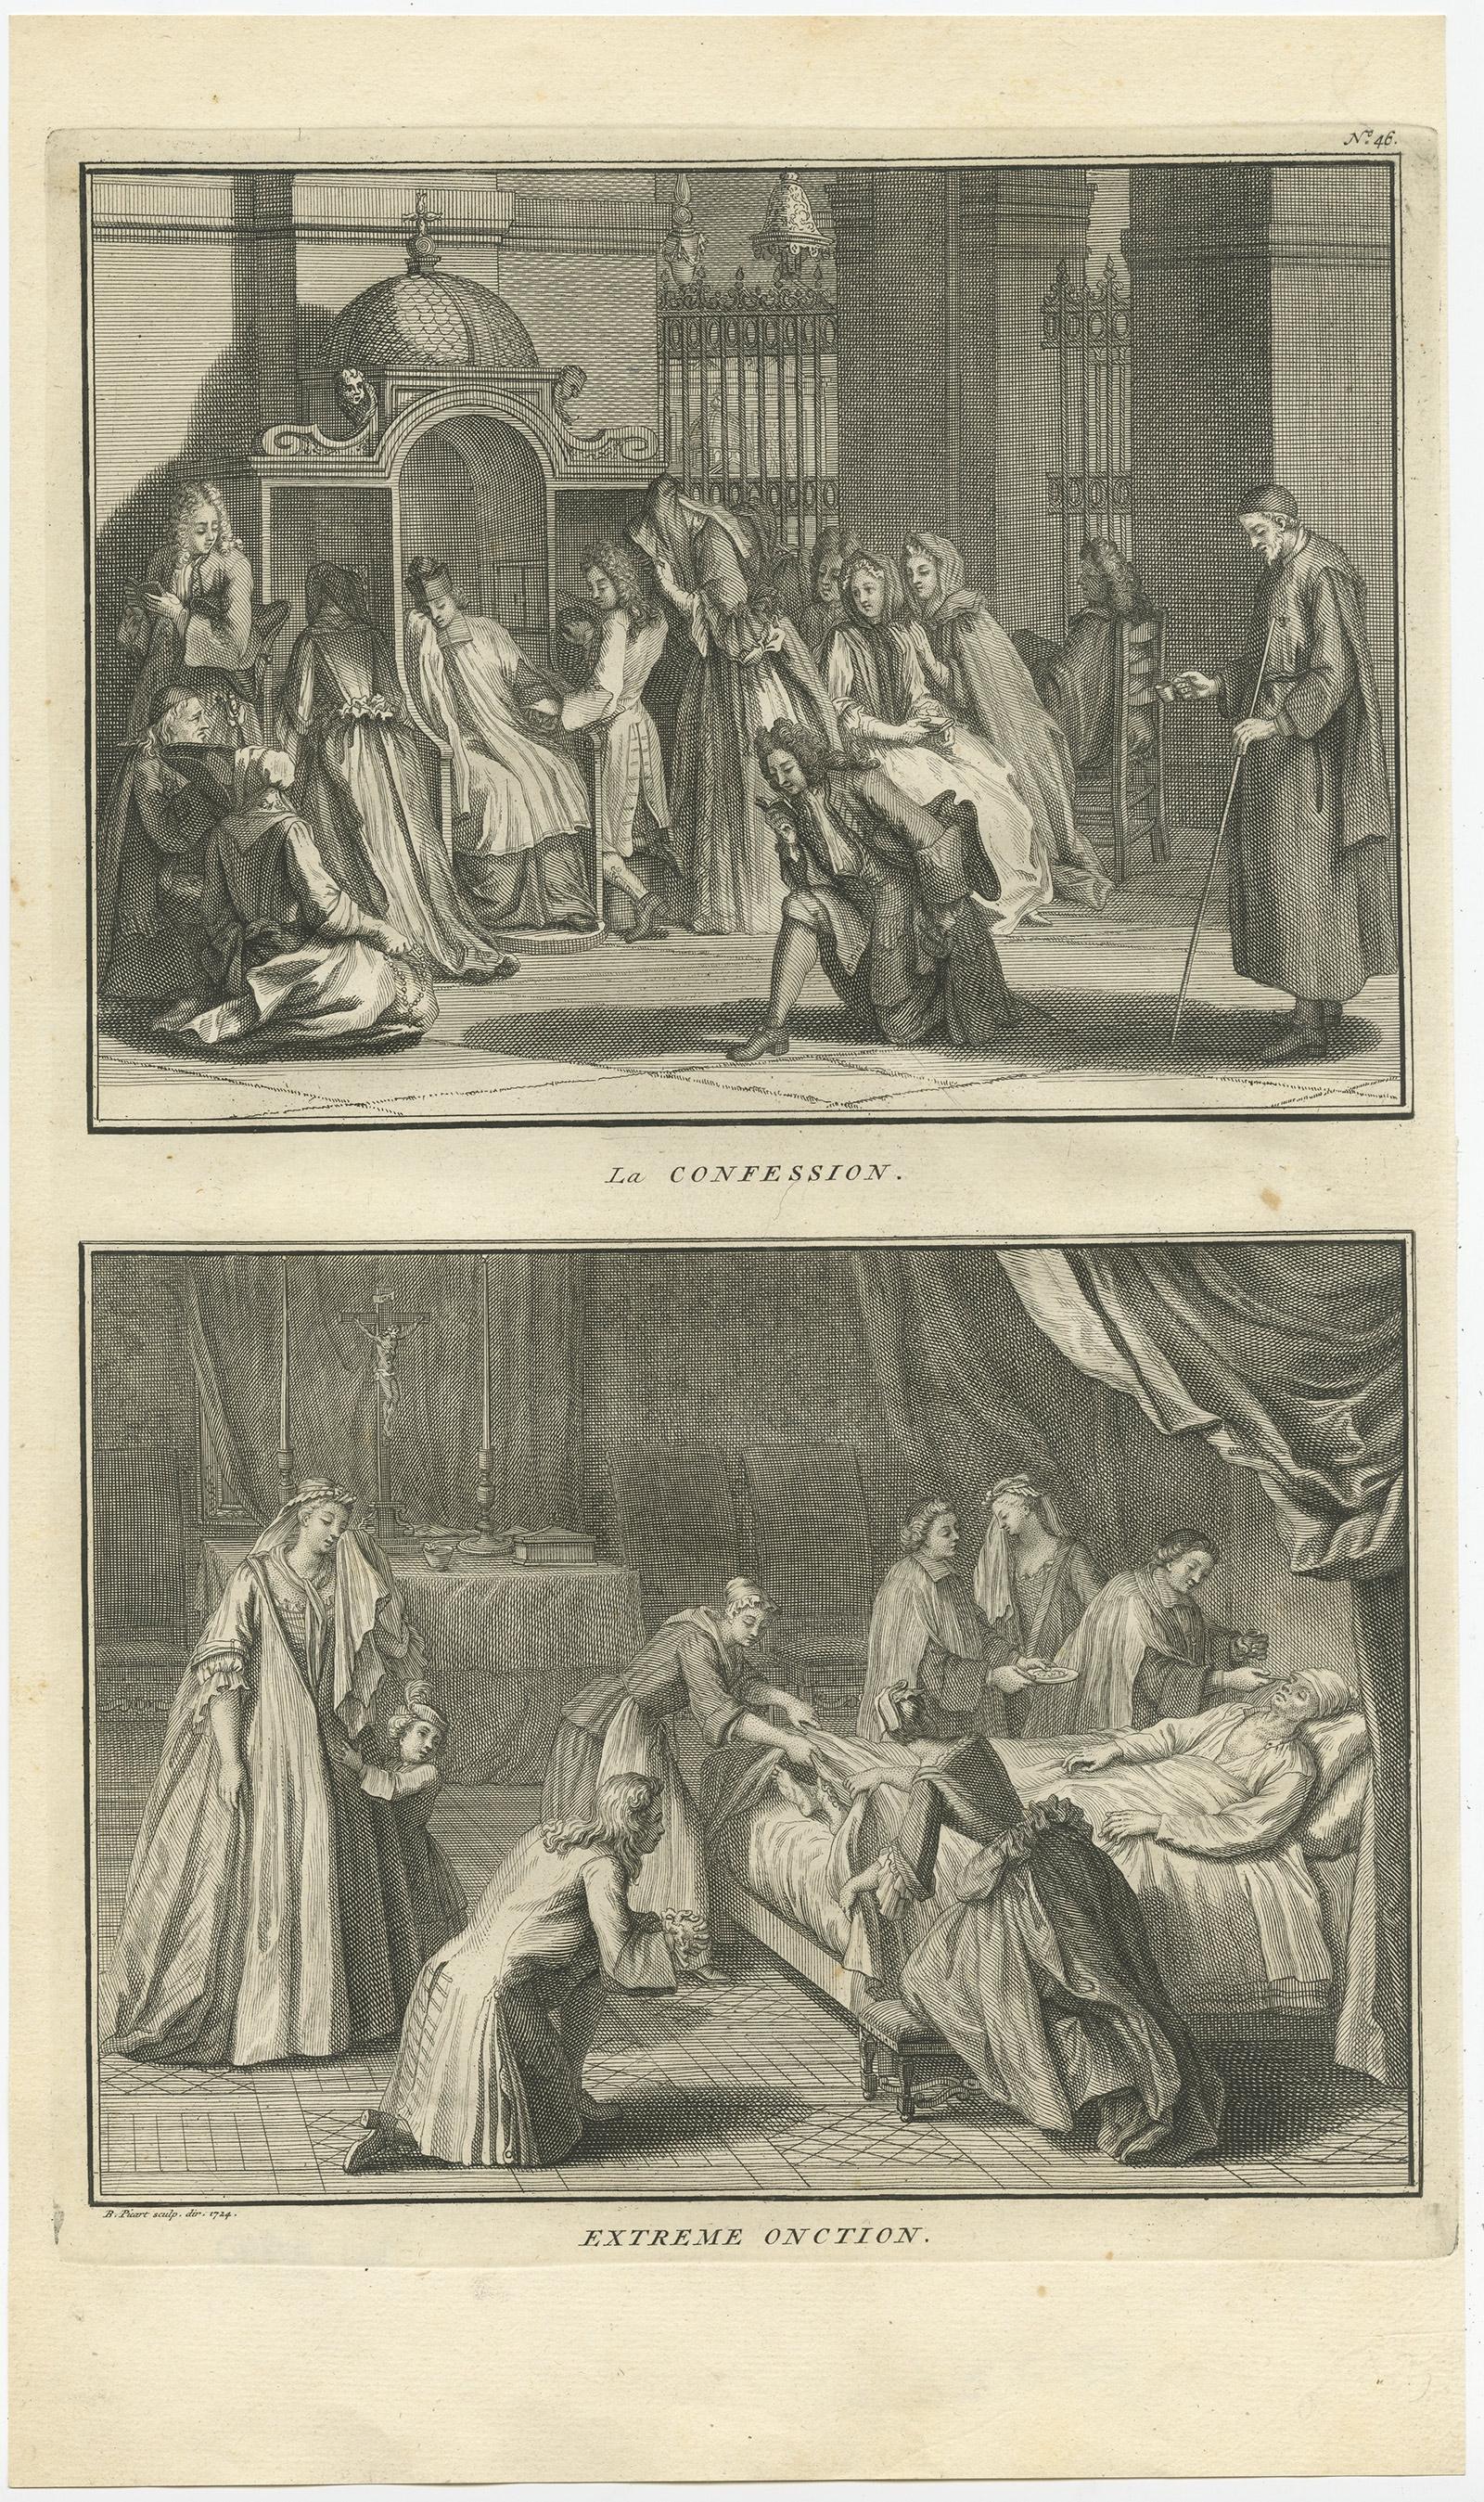 Two religious images on one sheet. The upper images depicts the confession and the lower image depicts the anointing of the sick. This print originates from 'Ceremonies et costumes Religieuses (..)'. 

Artists and Engravers: Bernard Picart